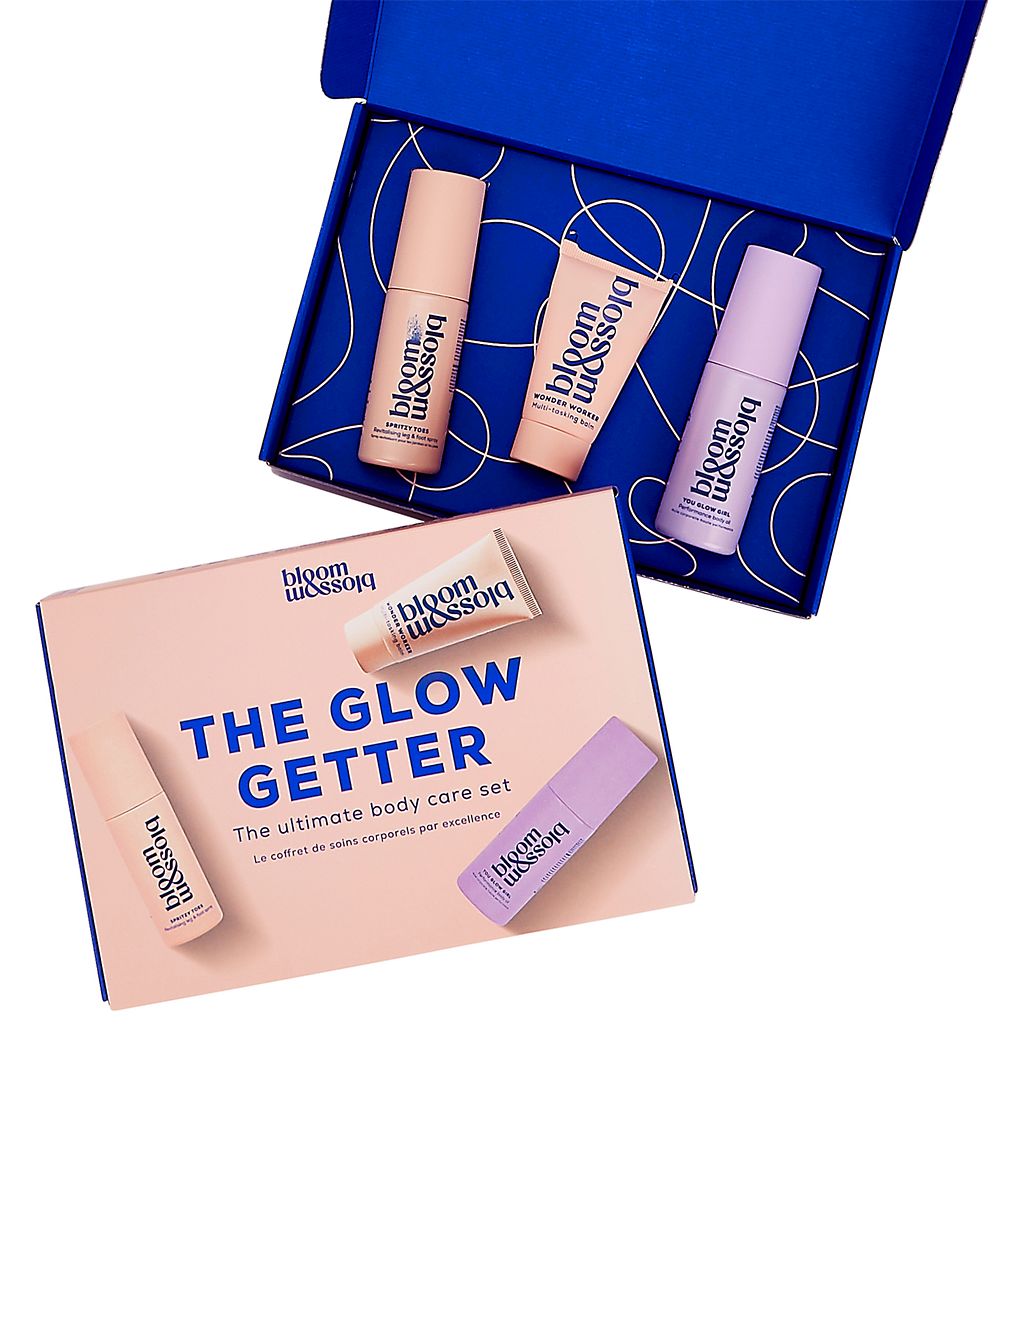 The Glow Getter - The Ultimate Body Care Set 1 of 3